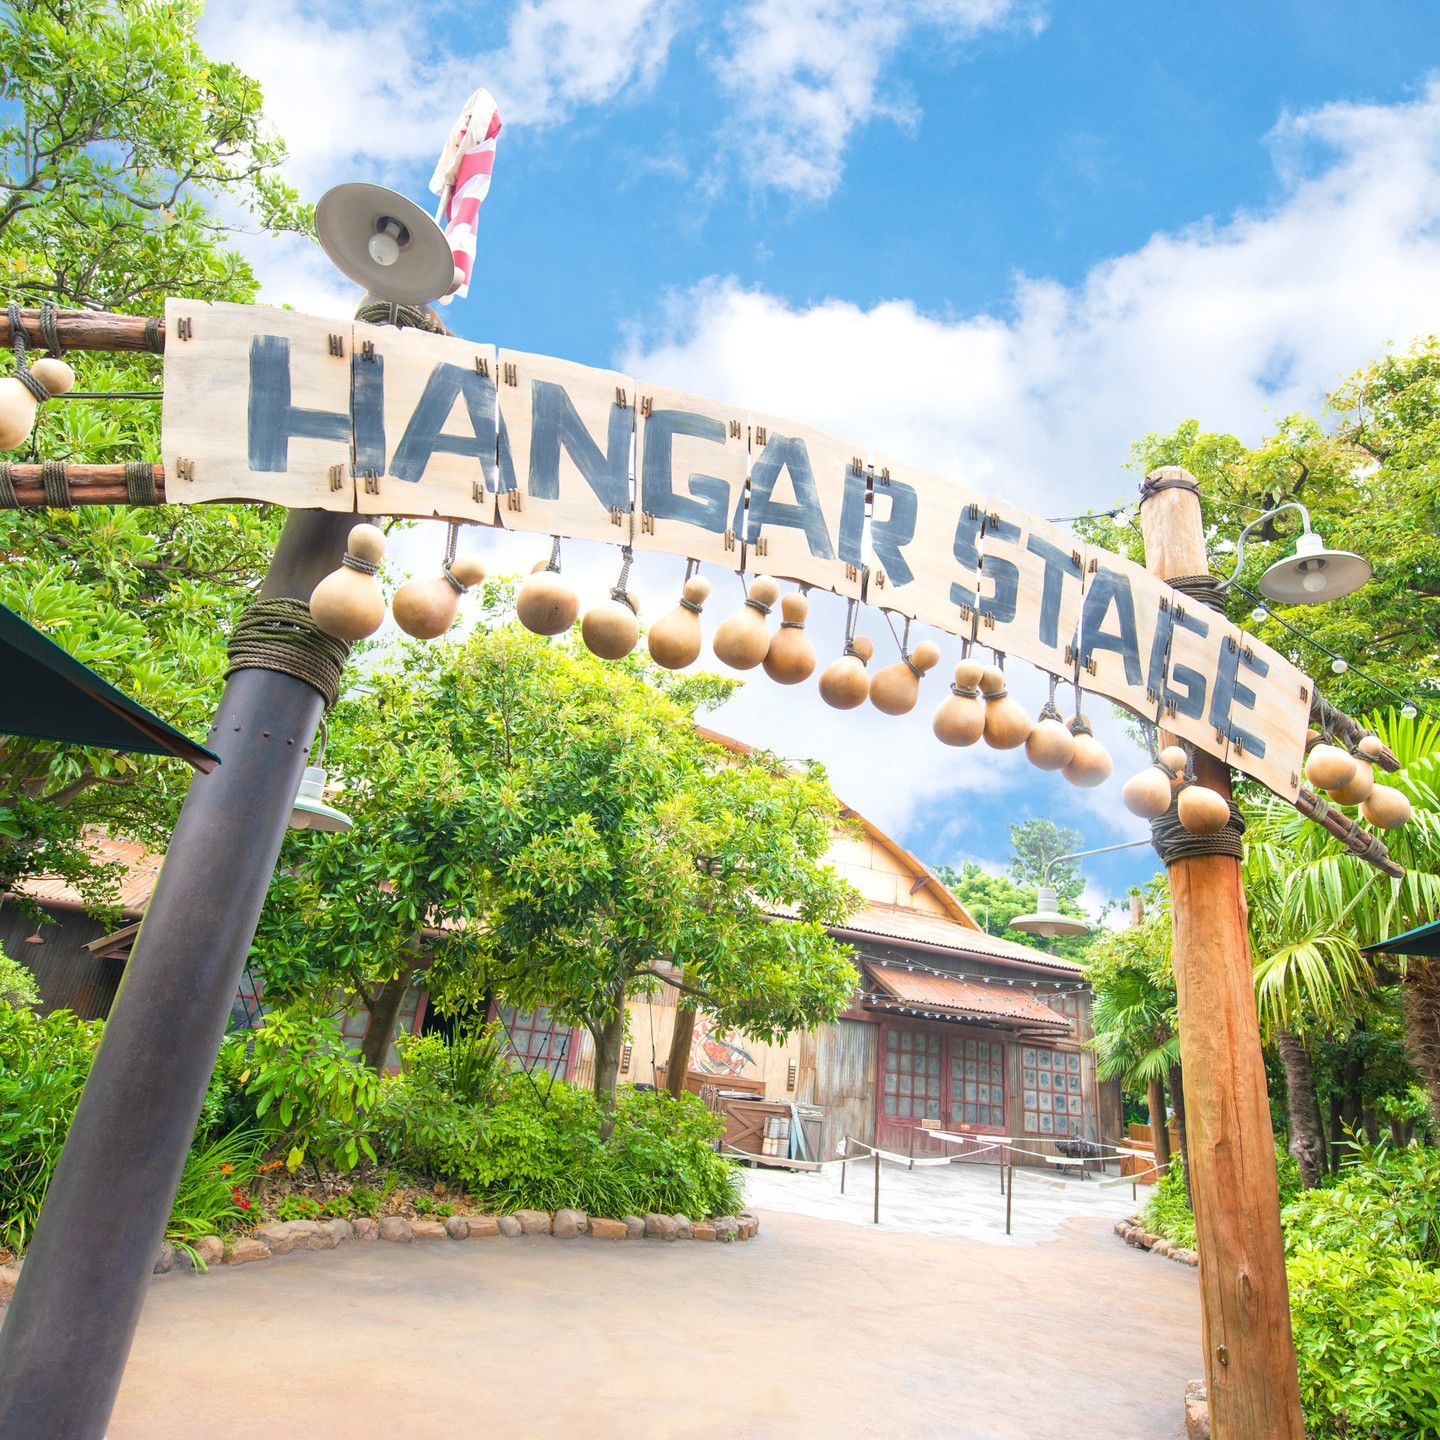 You never know what you will discover in the Jungle!
夏気分が高まる～☀
#hangarstage...的图像